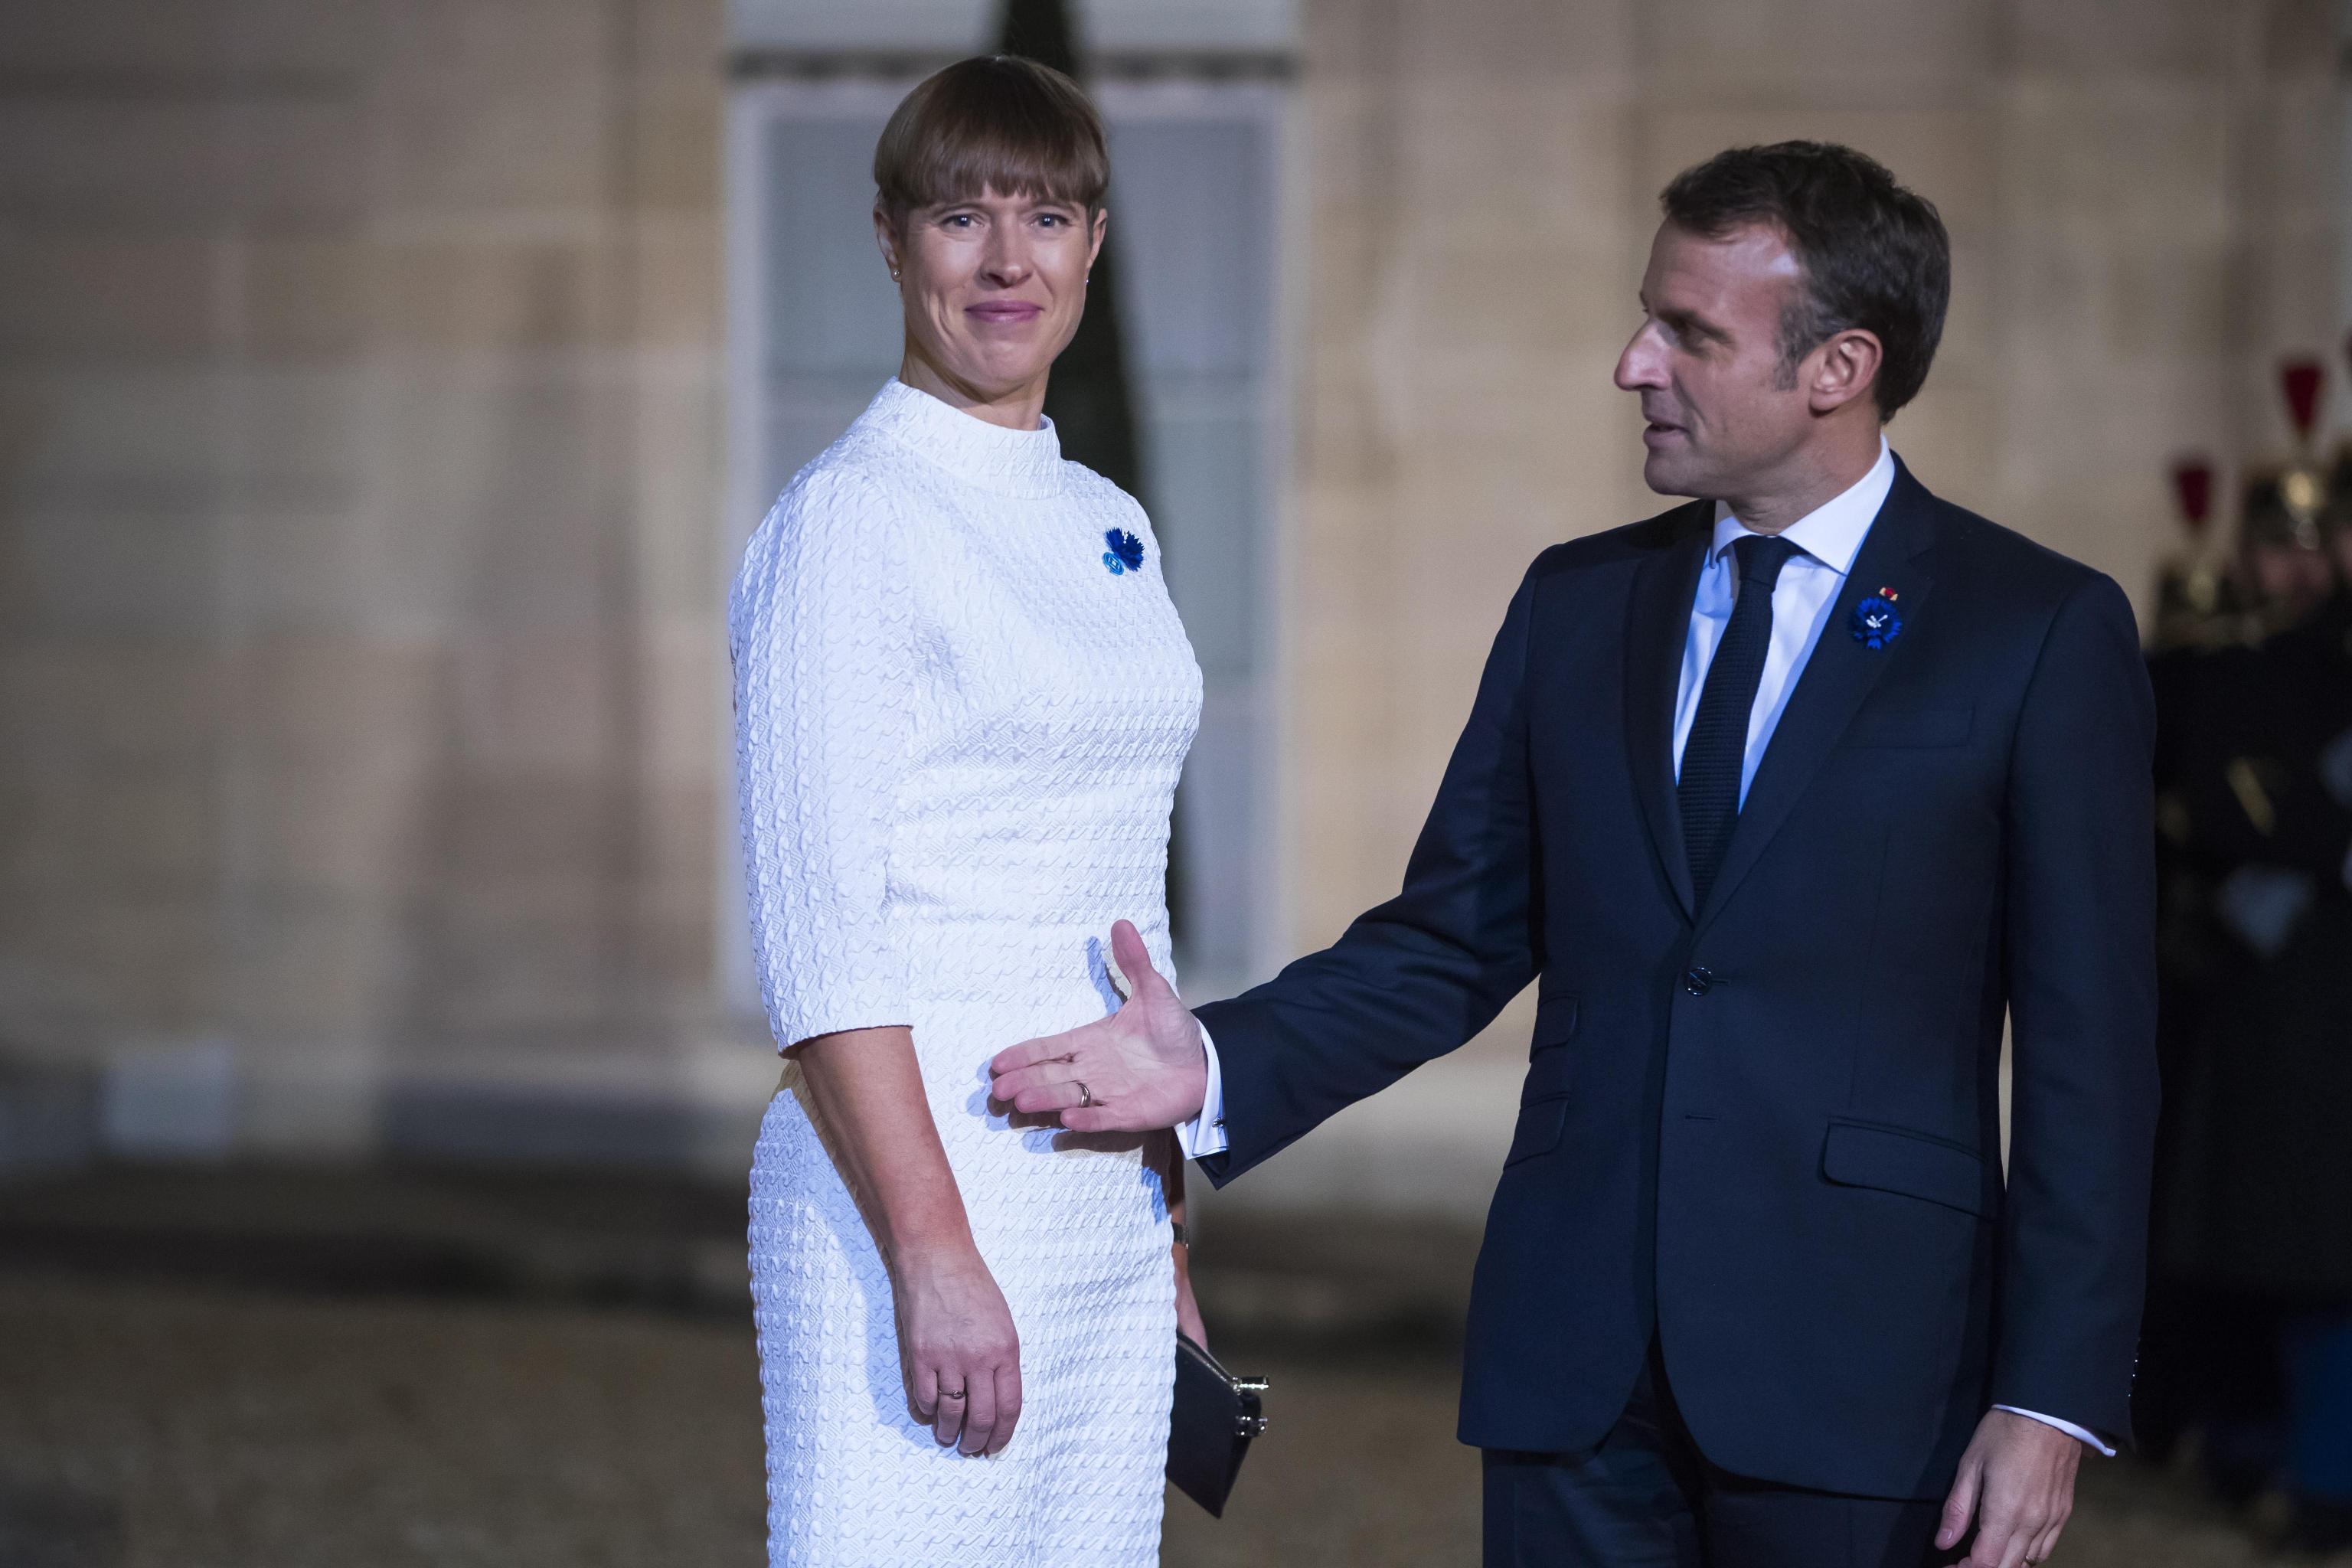 epa07989435 French President Emmanuel Macron (R) welcomes Estonian president Kersti Kaljulaid (L) for a dinner held with participants of the Paris Peace Forum, at the Elysee Palace, in Paris, France, 11 November 2019.  EPA/CHRISTOPHE PETIT TESSON